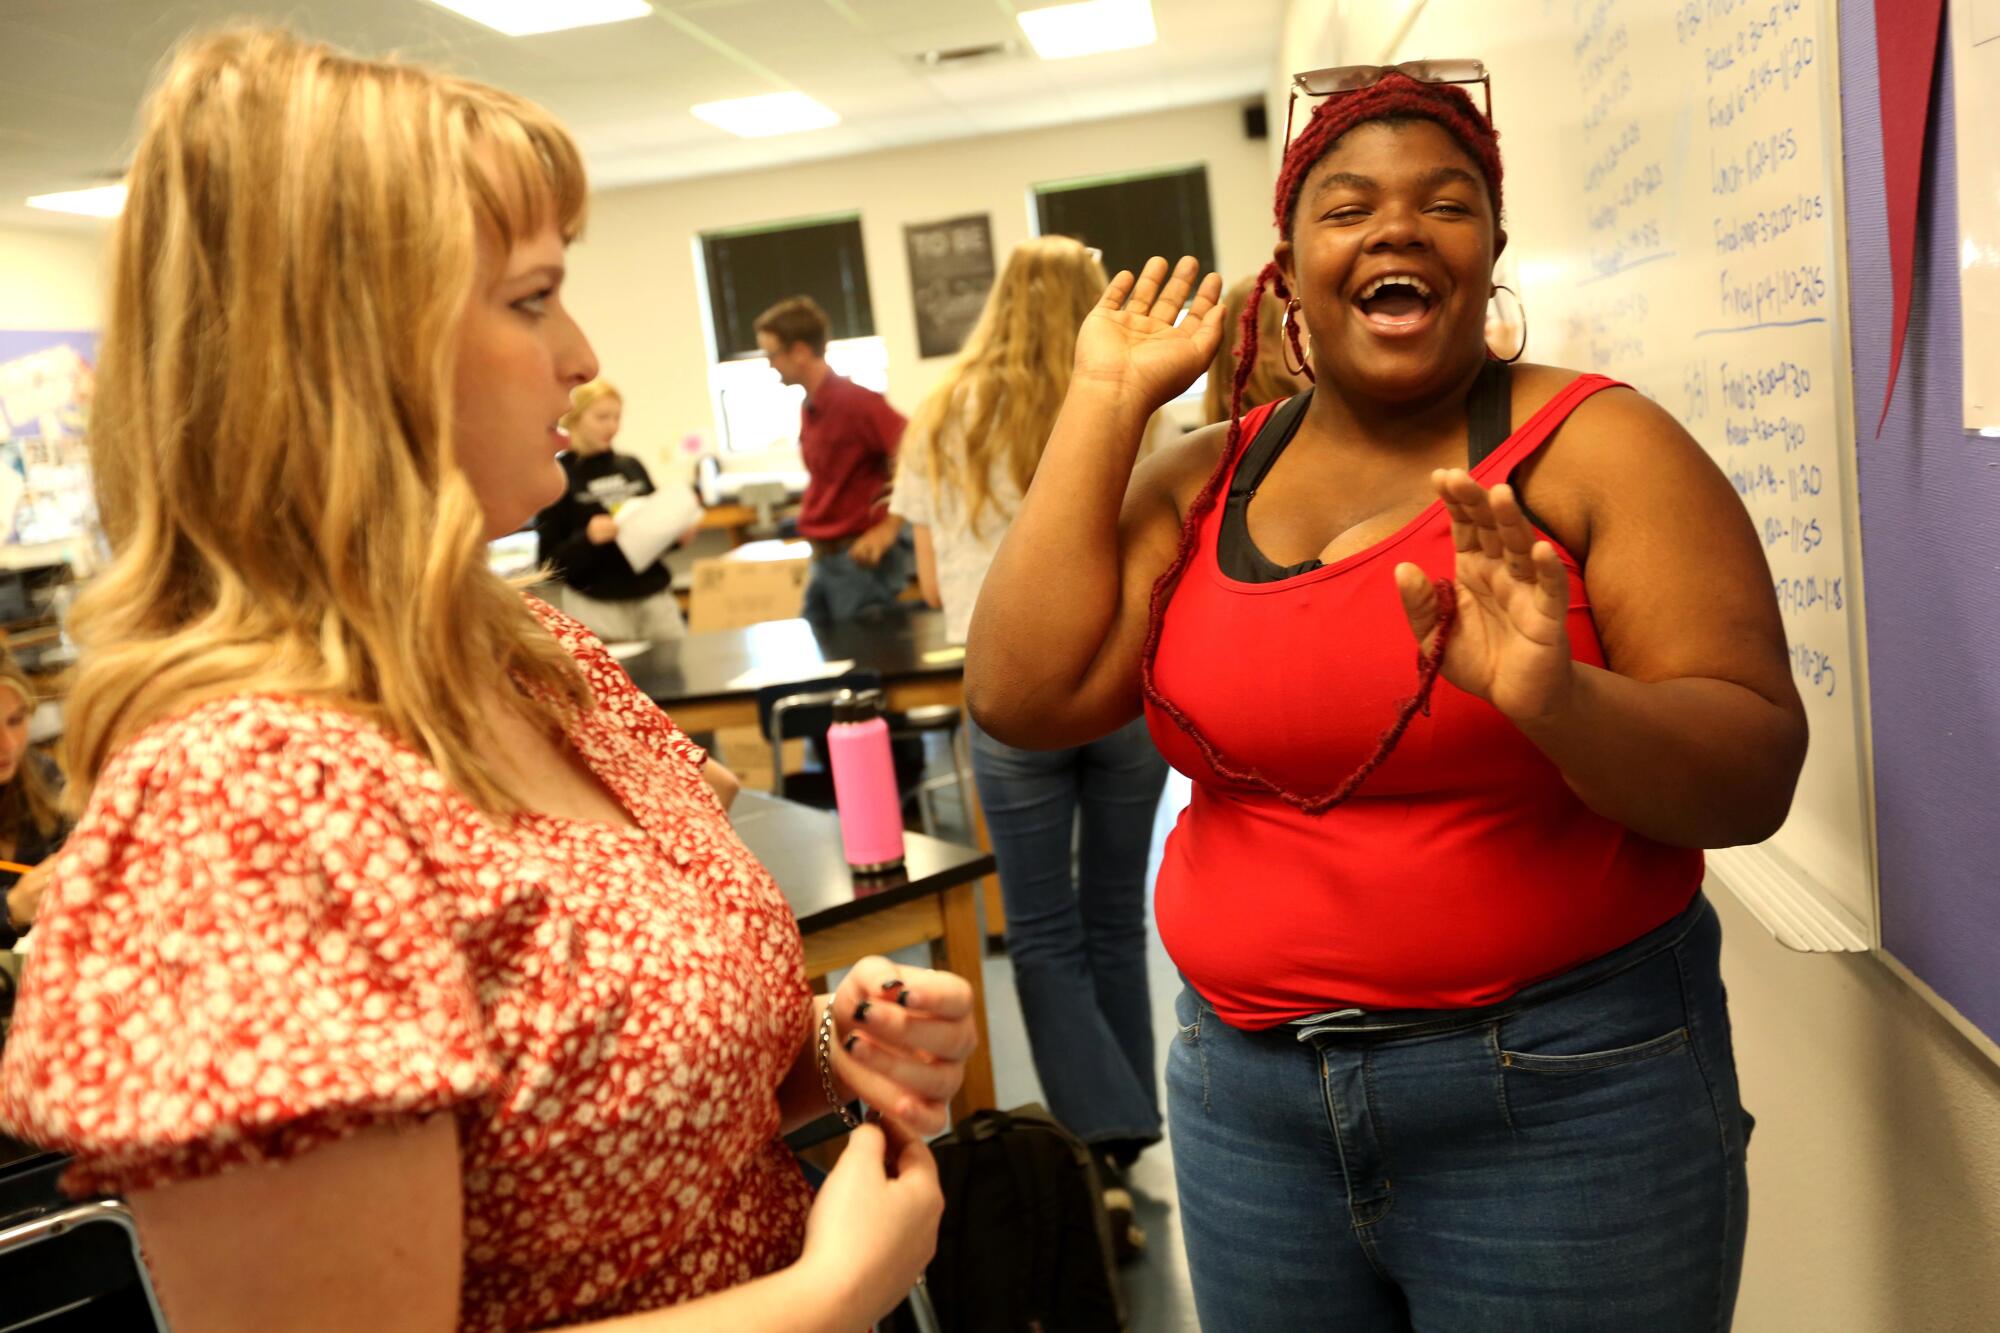 Ruby Sparks, right, and Natalie Bunker chat about life after graduation during a physics class at Modoc High School.